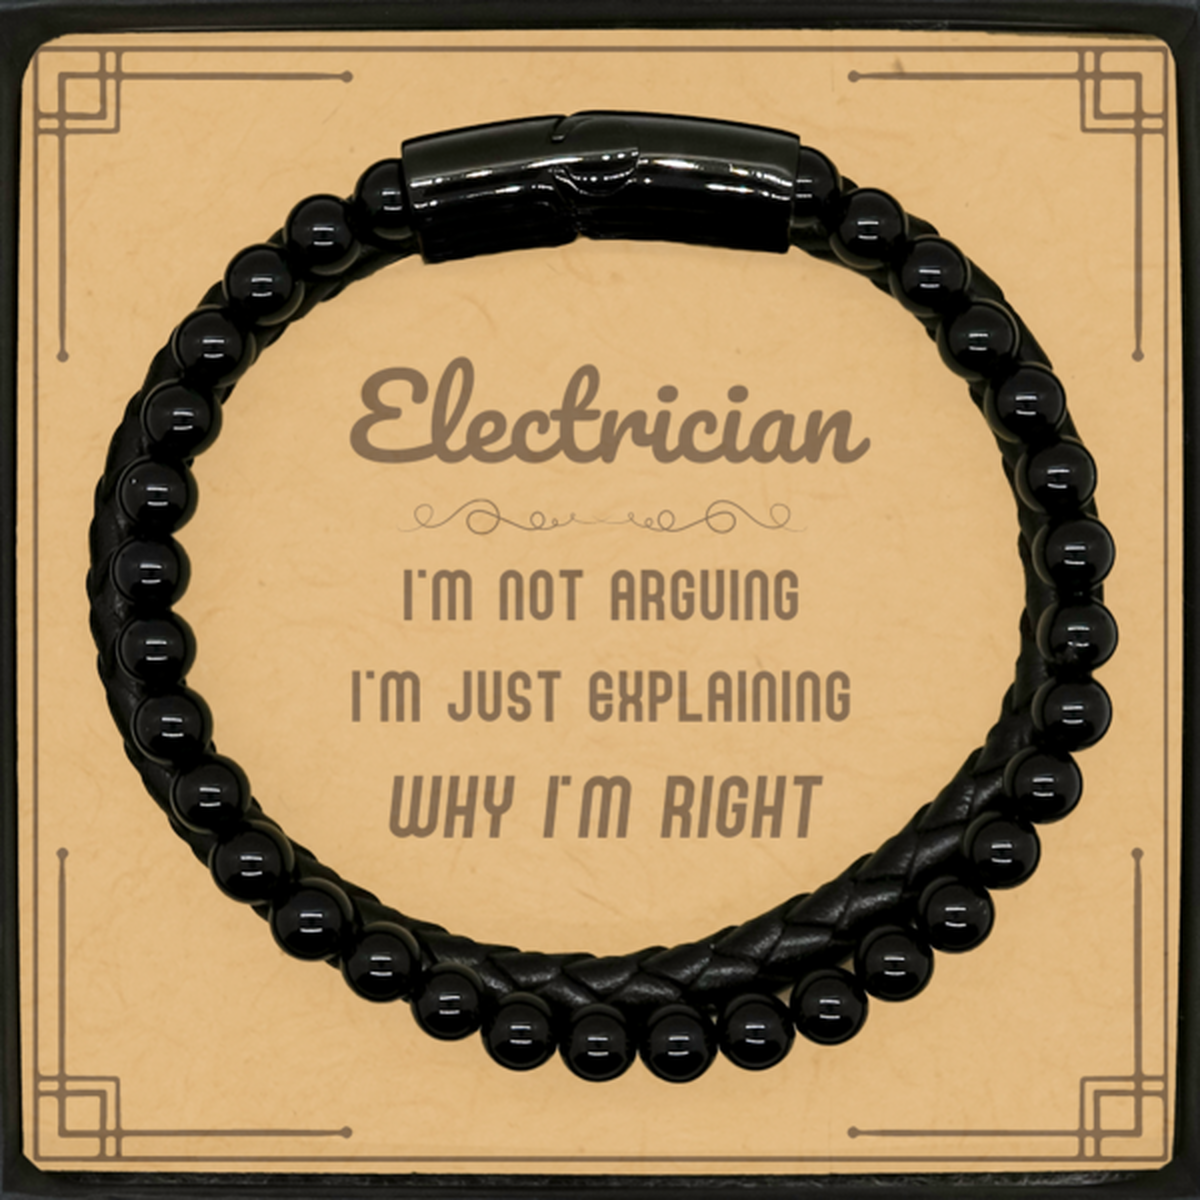 Electrician I'm not Arguing. I'm Just Explaining Why I'm RIGHT Stone Leather Bracelets, Funny Saying Quote Electrician Gifts For Electrician Message Card Graduation Birthday Christmas Gifts for Men Women Coworker